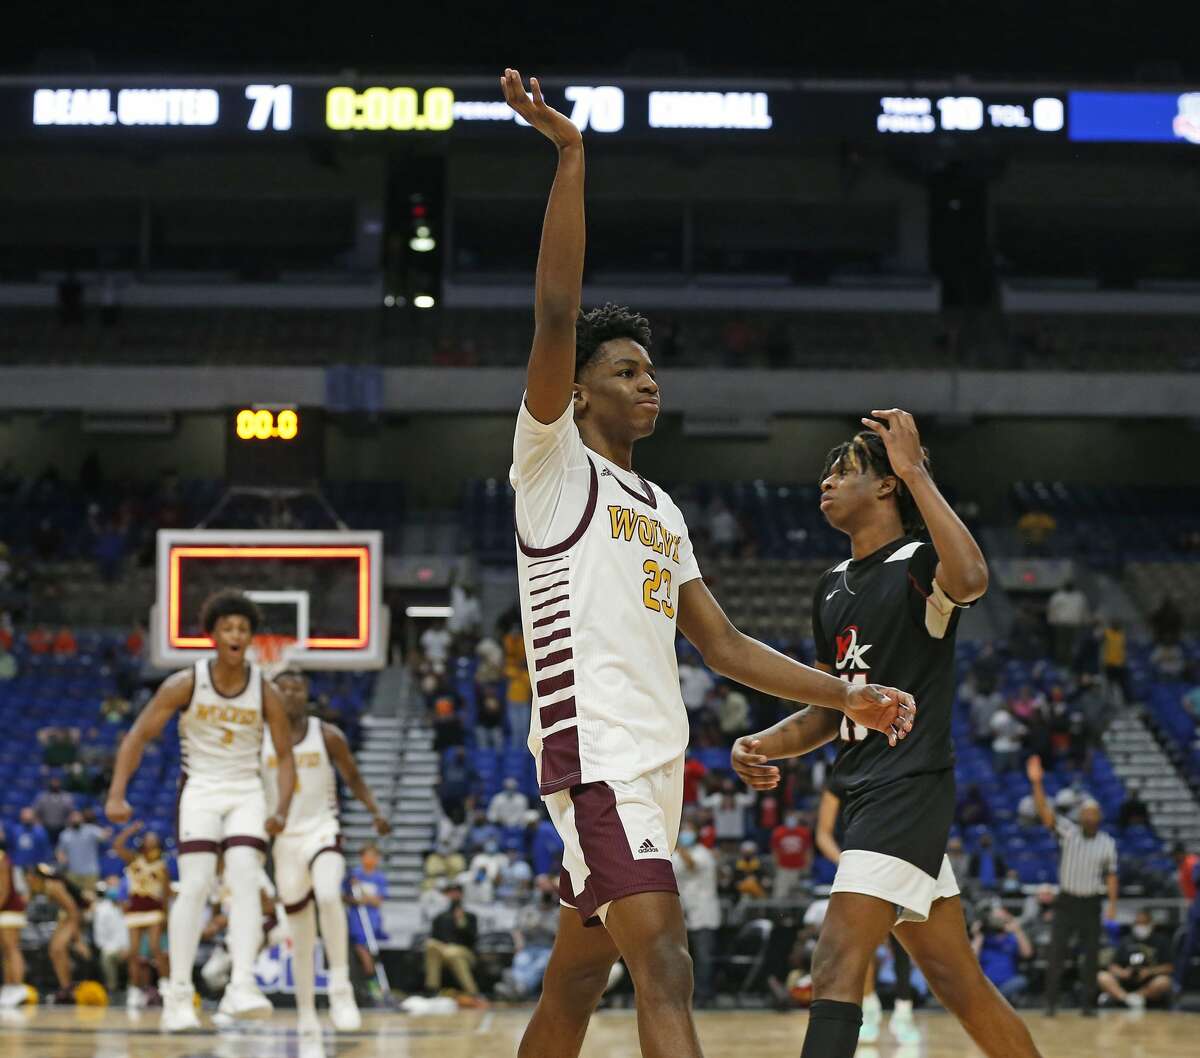 After Beaumont United Terrance Arceneaux #23 hit a three point shot inOT, Dallas Kimball Ronald Gustus #11 walks off the court. UIL boys Class 5A basketball state championship game on Friday, March 12, 2021 at the Alamodome.